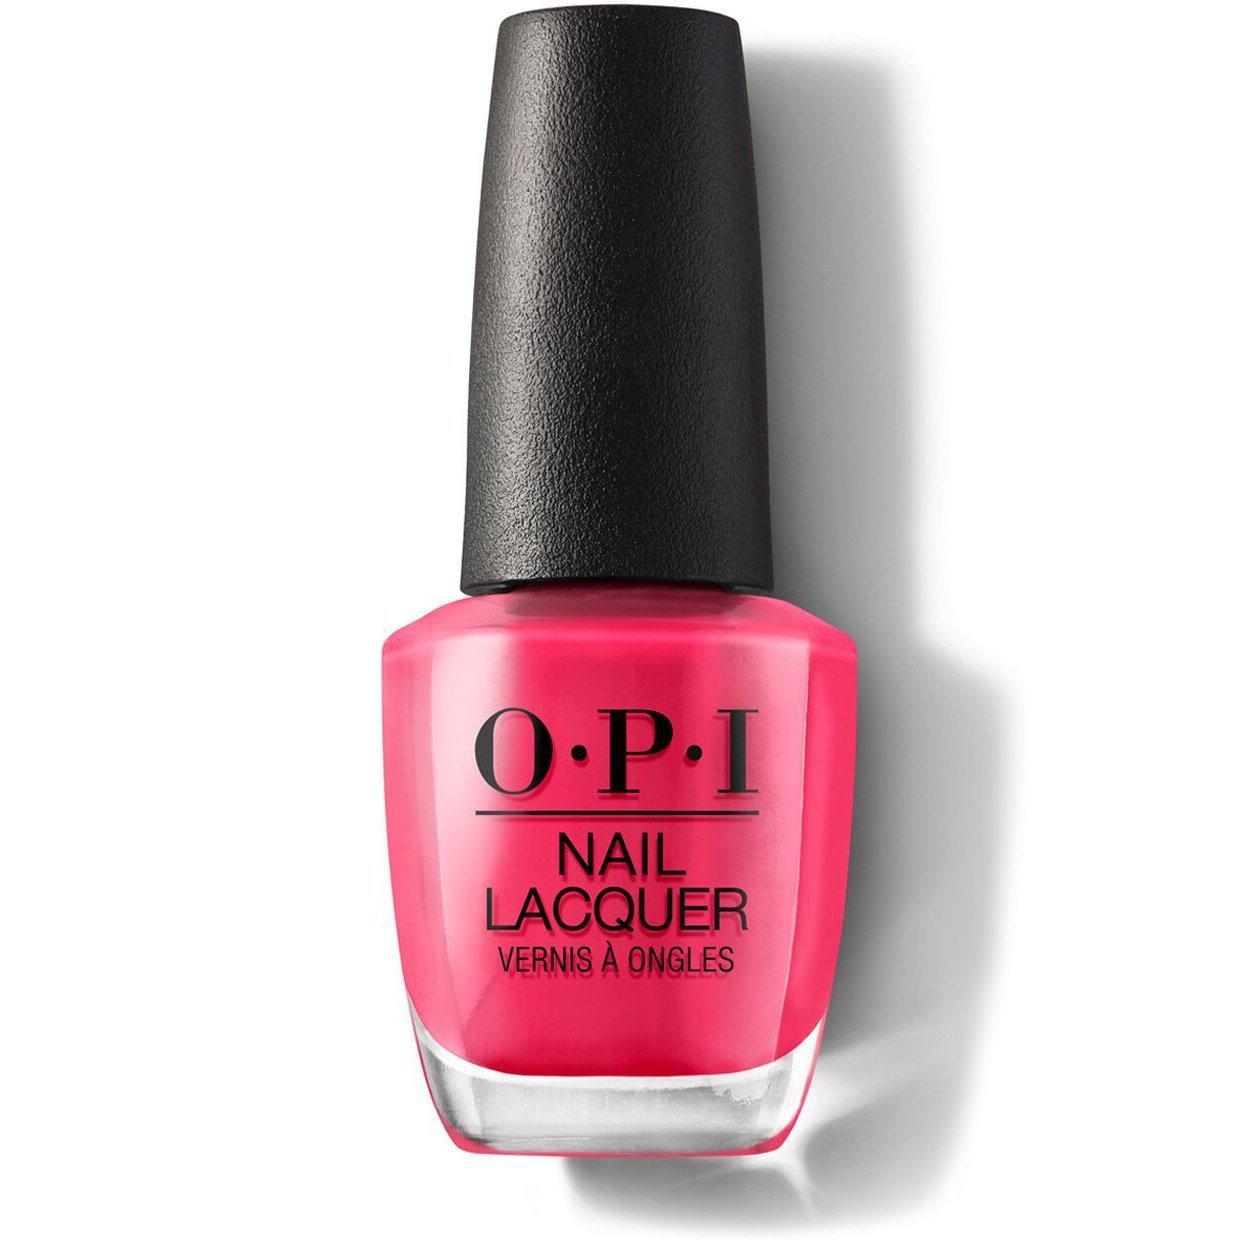 OPI nail lacquer Charged up Cherry